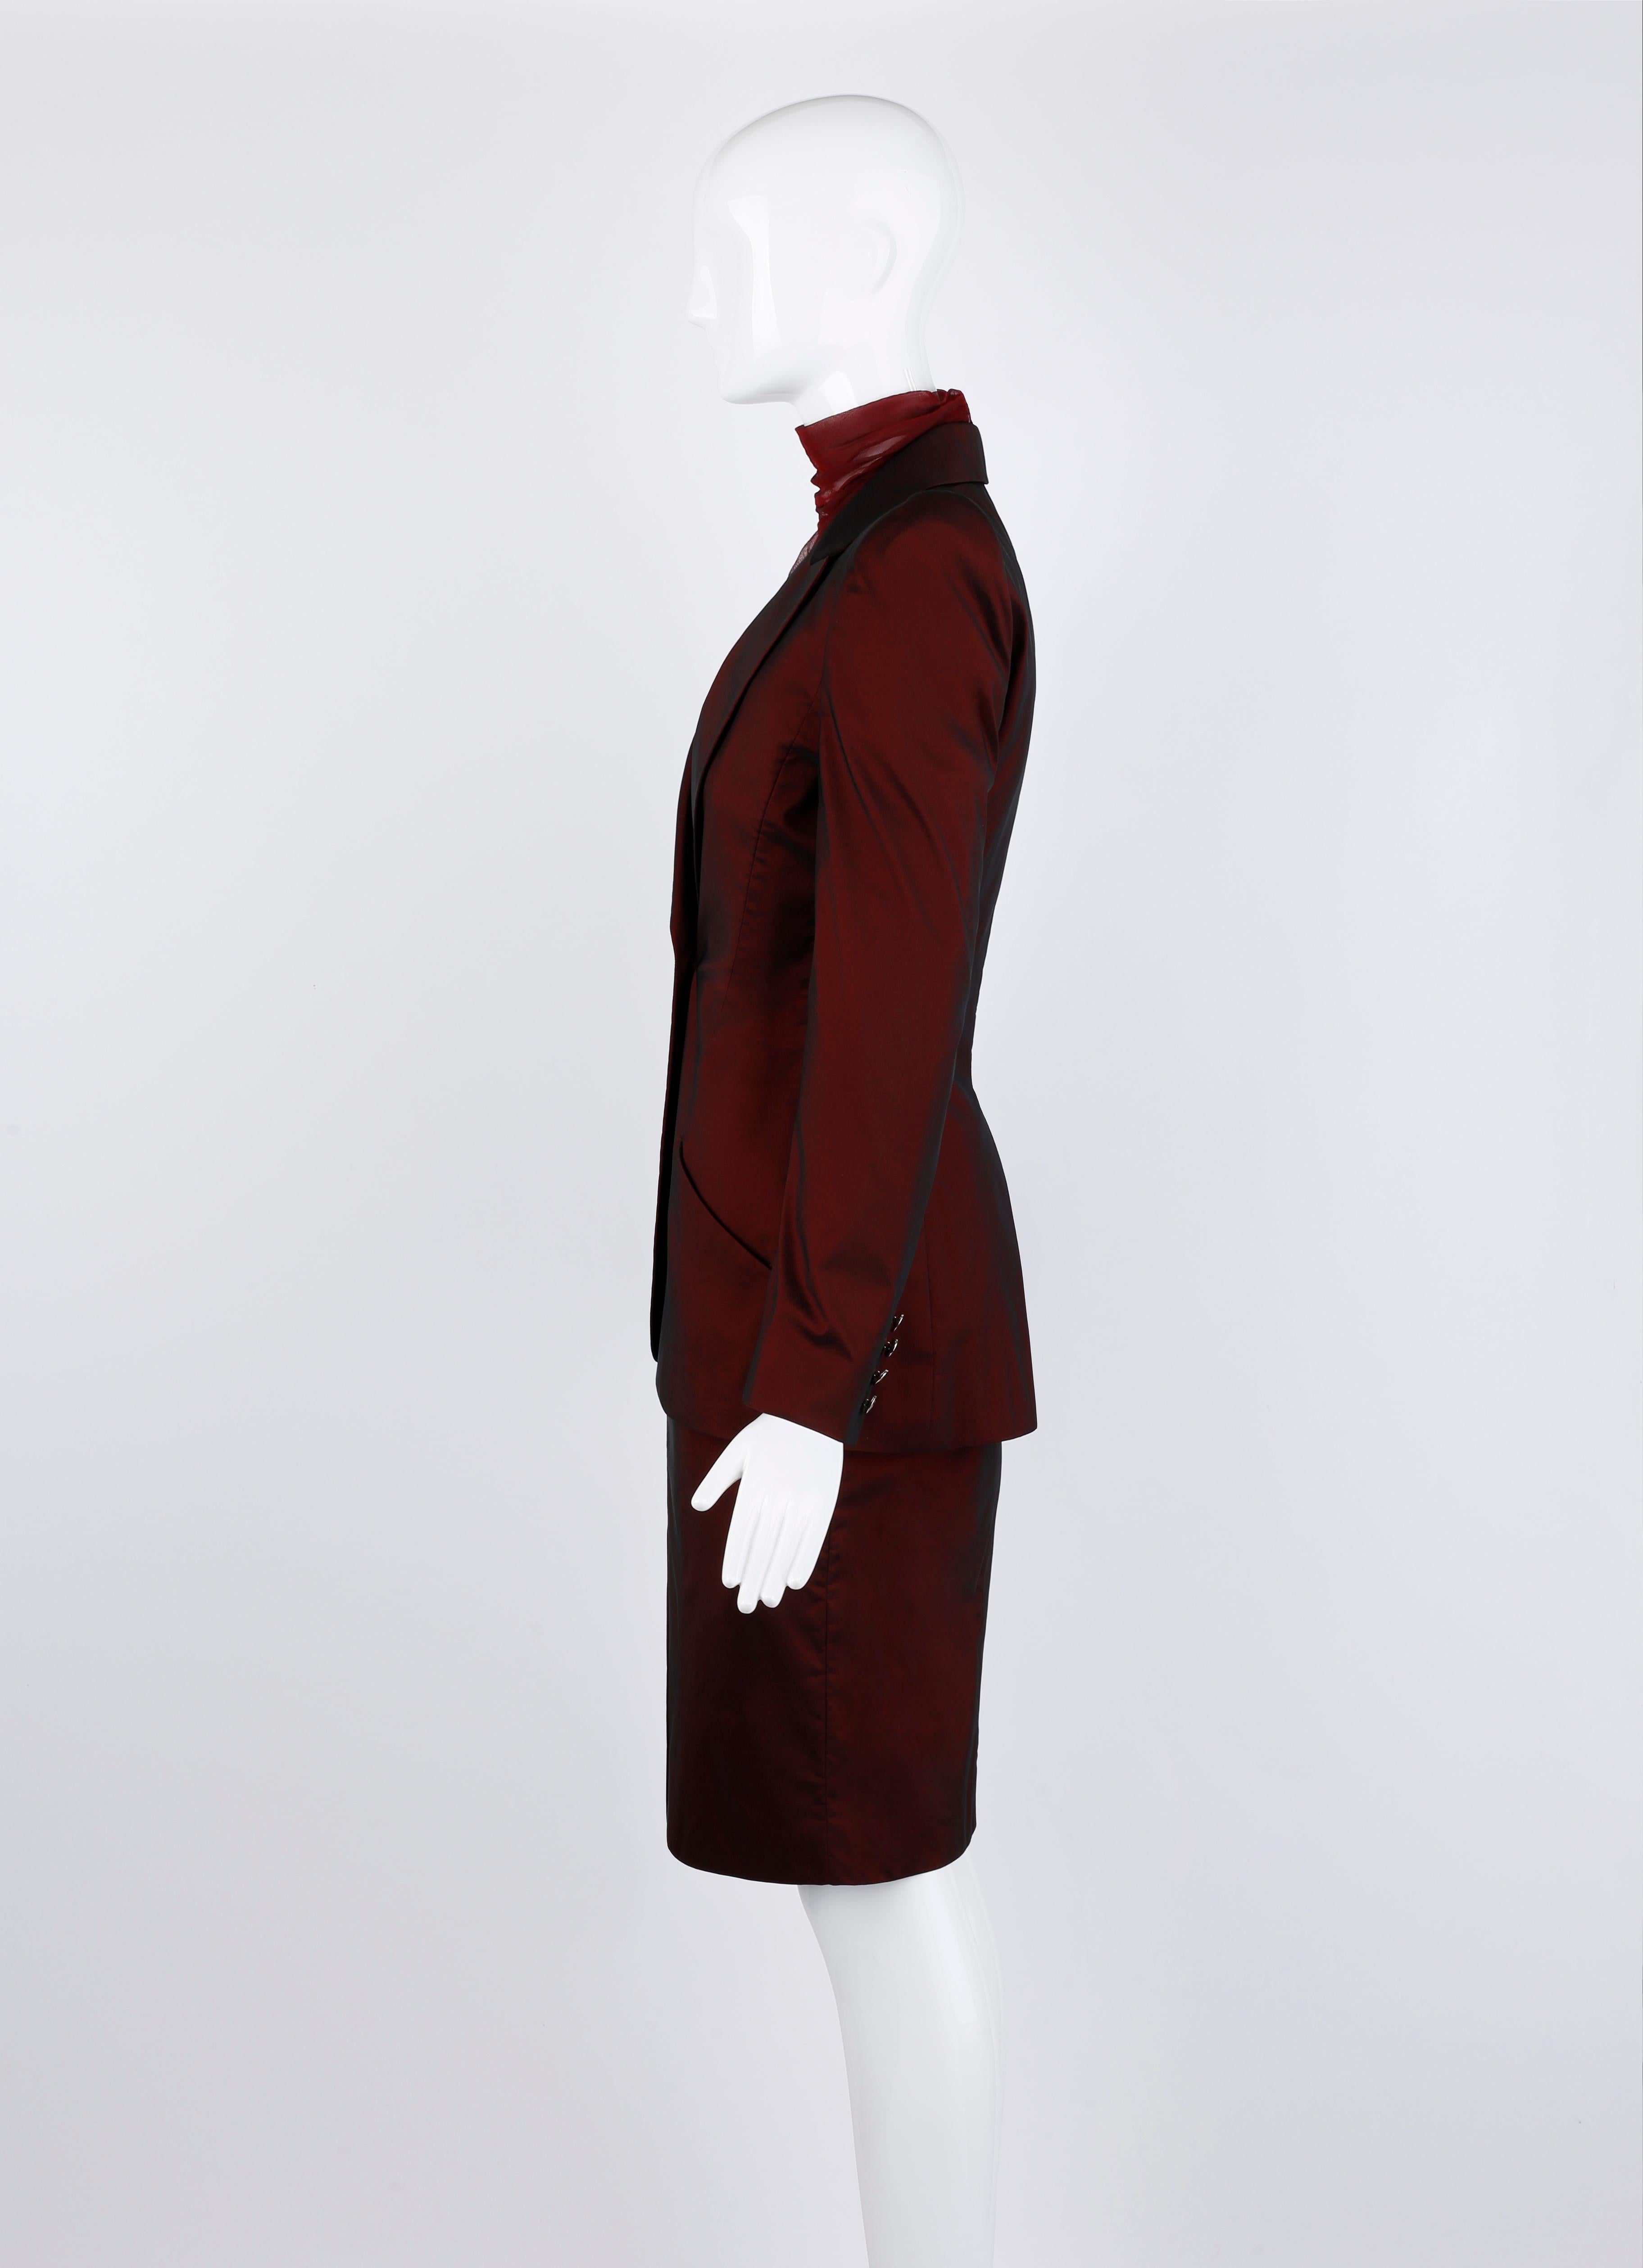 Givenchy Couture Alexander McQueen F/W 1998 Sheer Mock Neck Dress & Blazer Suit For Sale 8